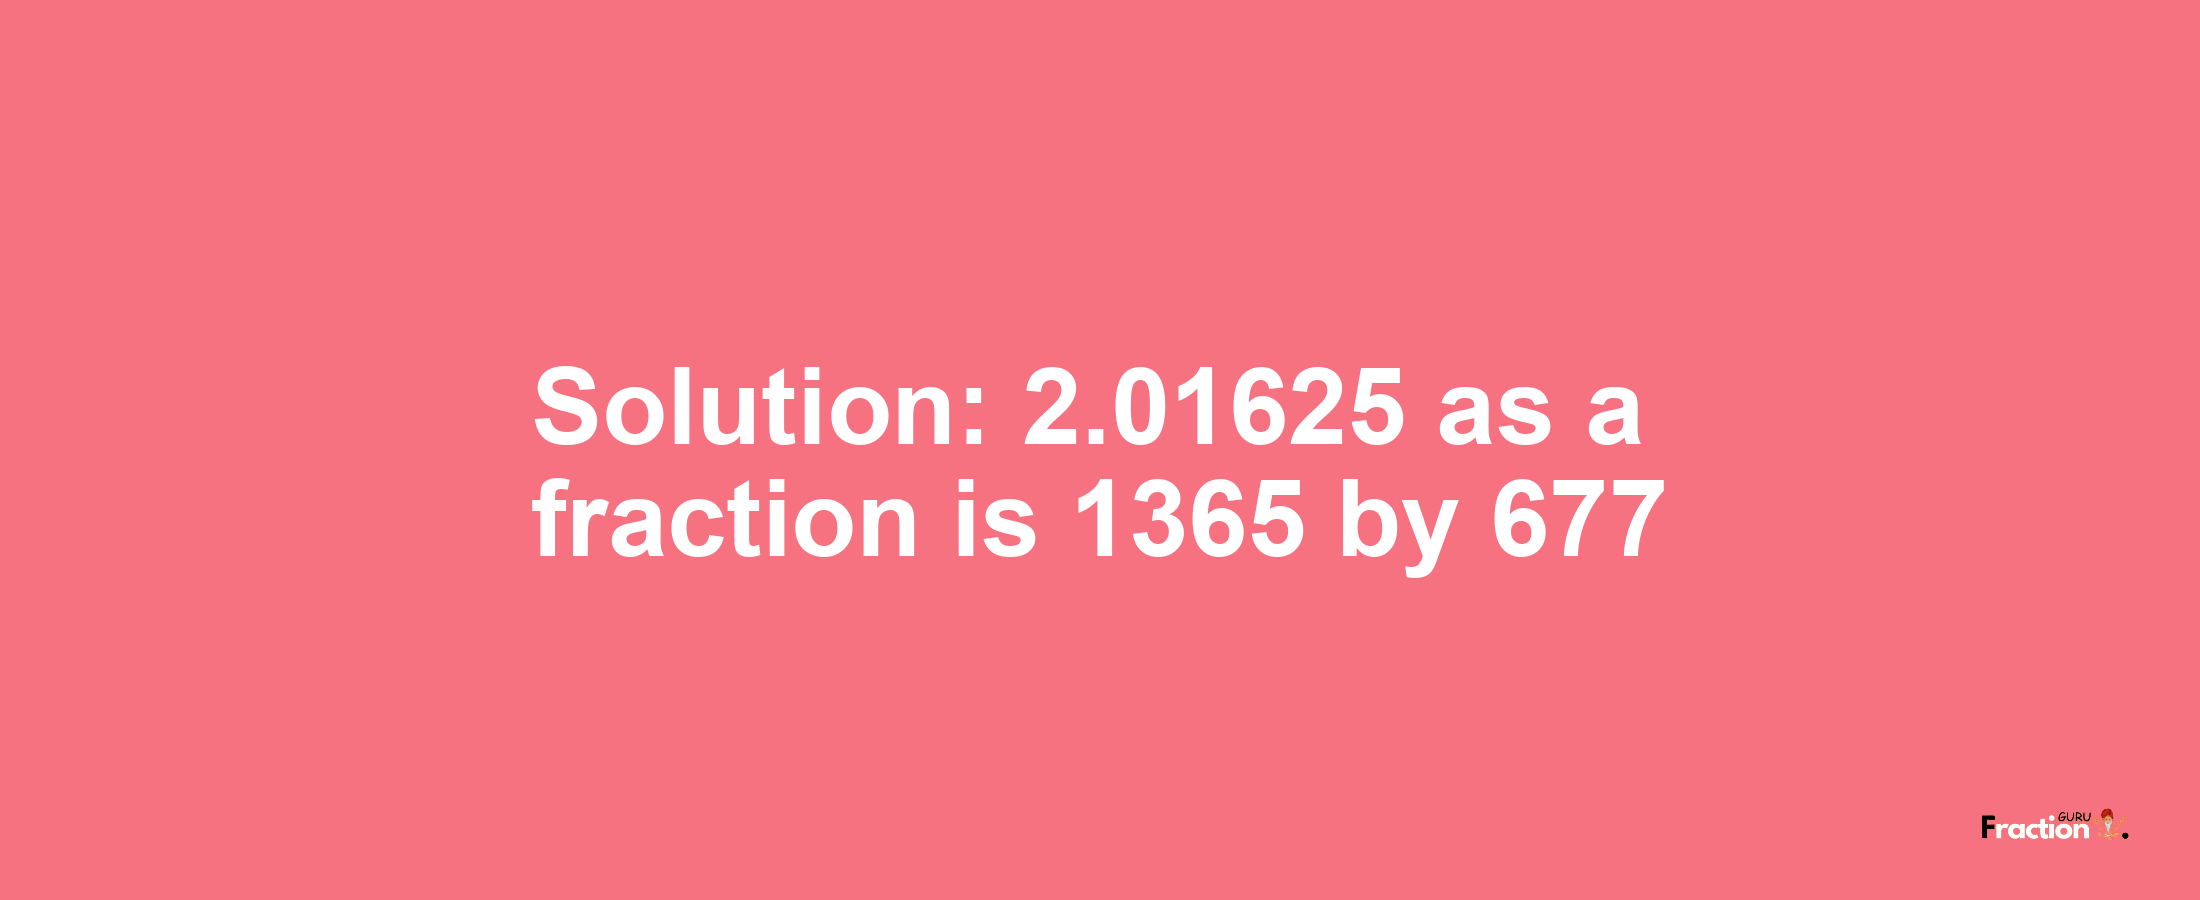 Solution:2.01625 as a fraction is 1365/677